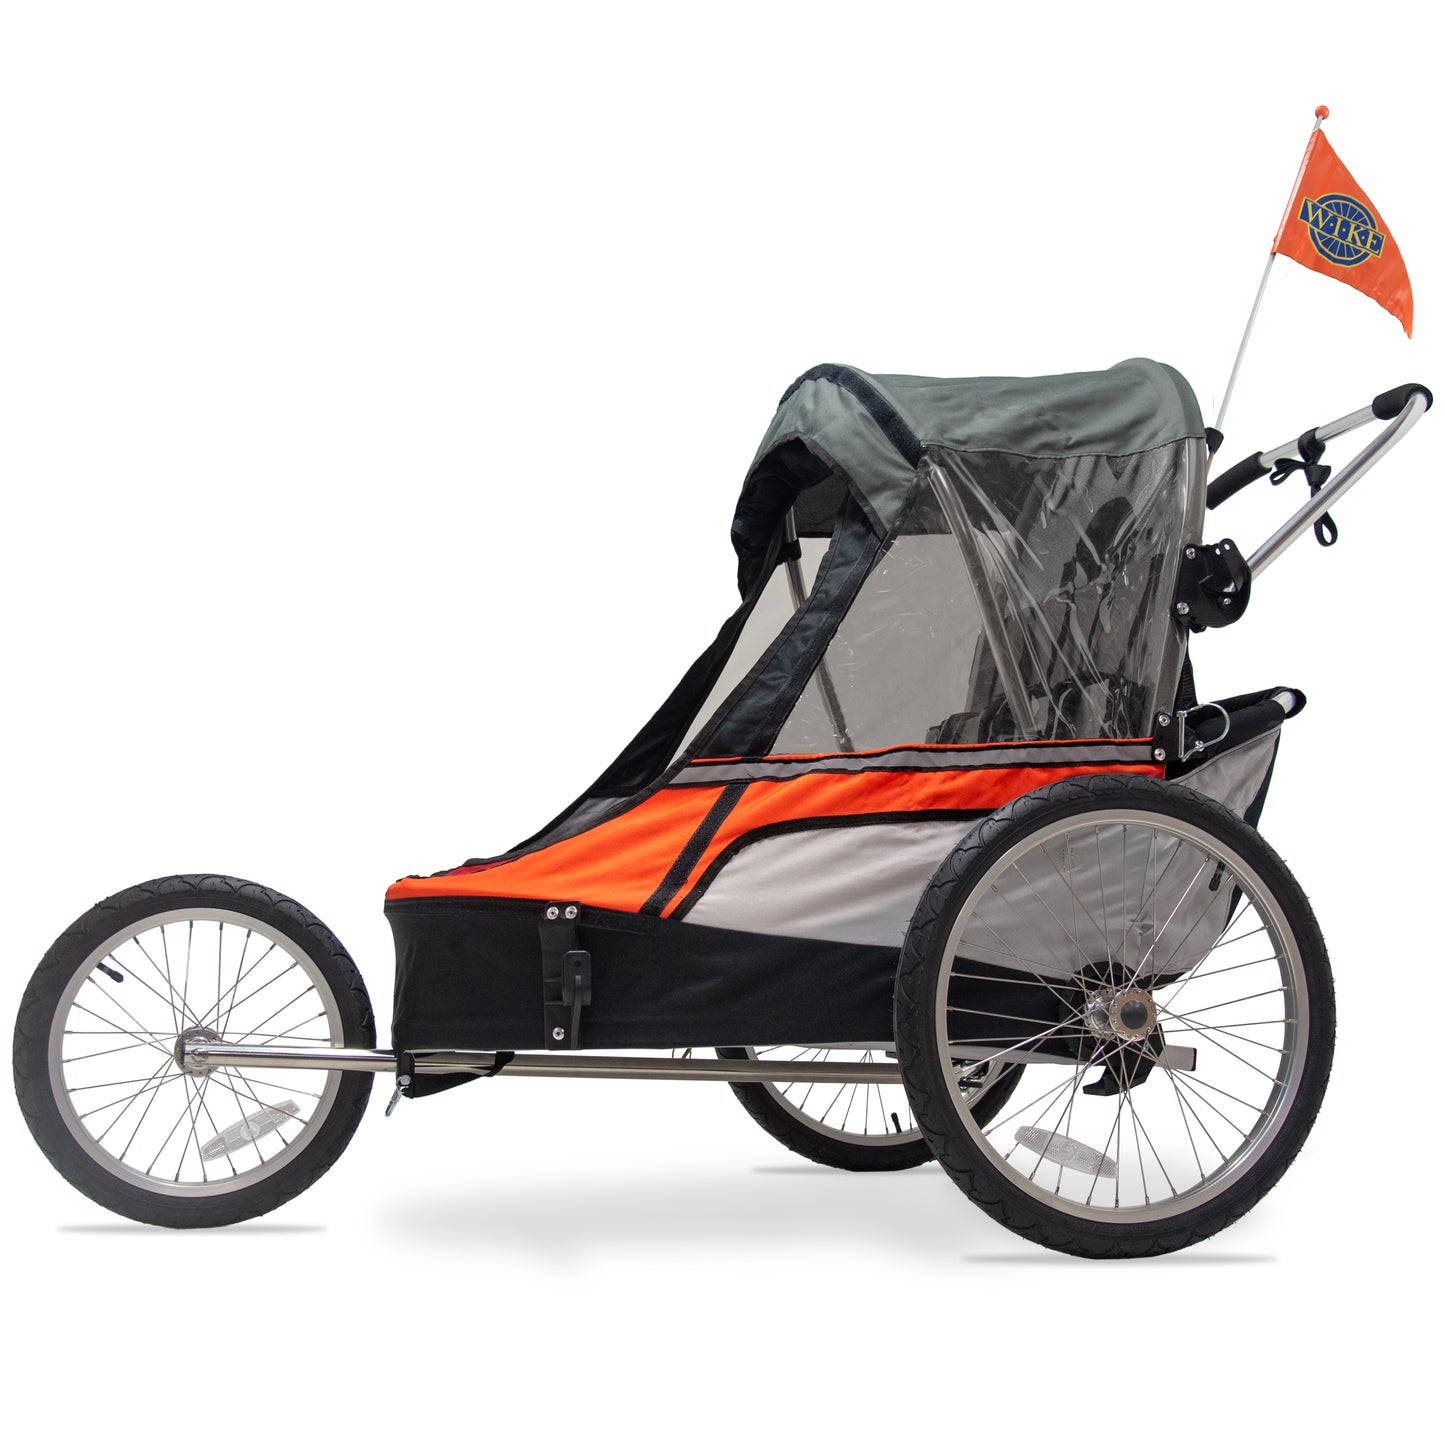 Wike Premium Double Children's Bike Trailer - Includes Stroller and Jogging Kit